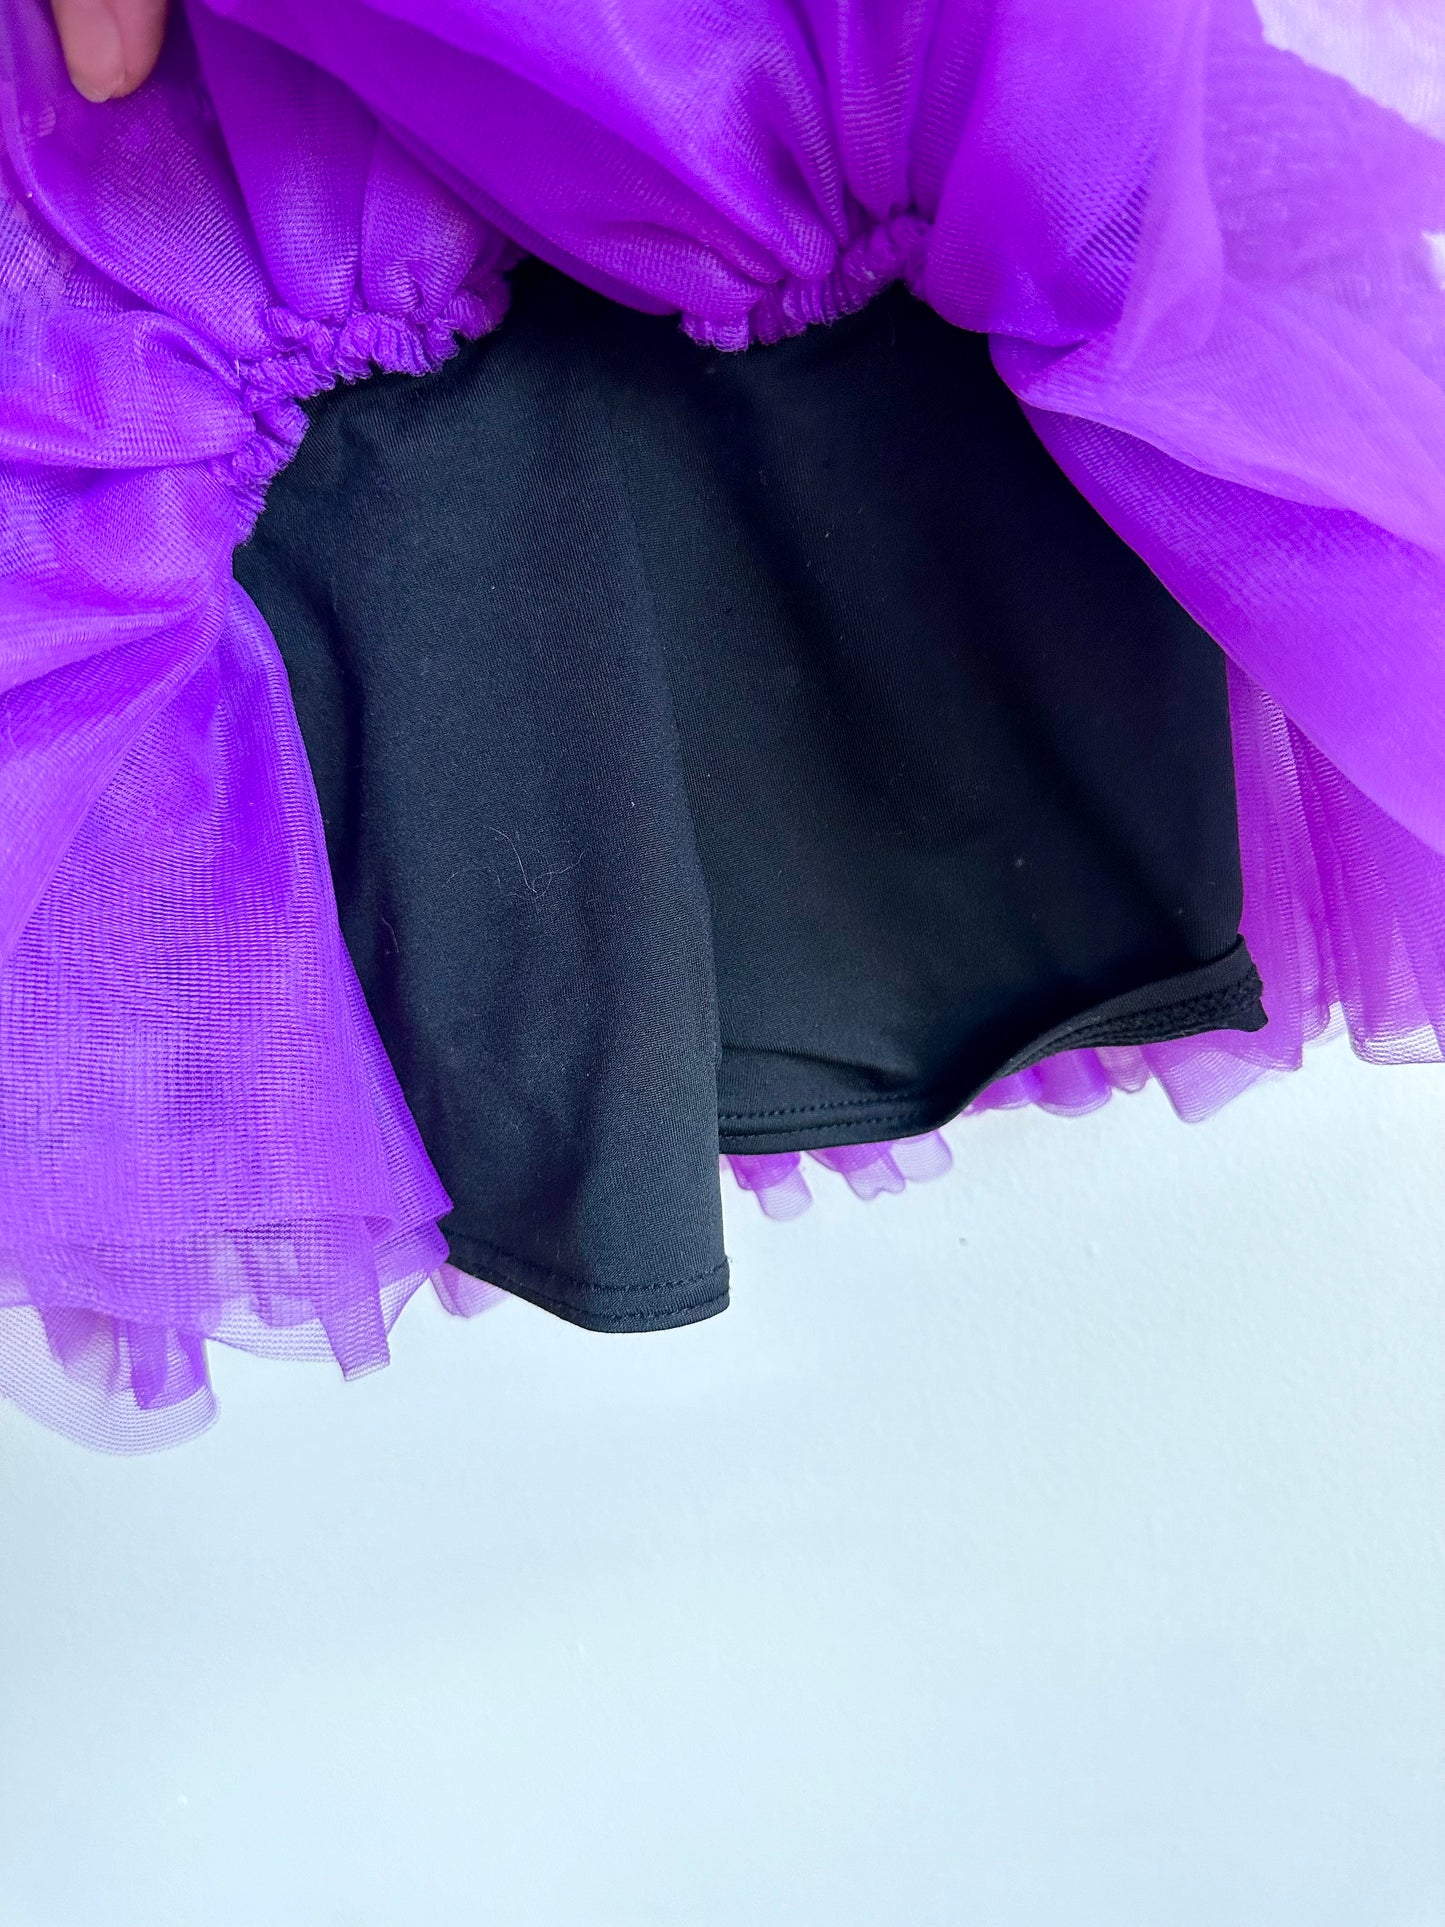 Black Leotard with Shorts + Purple Sequin Skirt / 4 years?